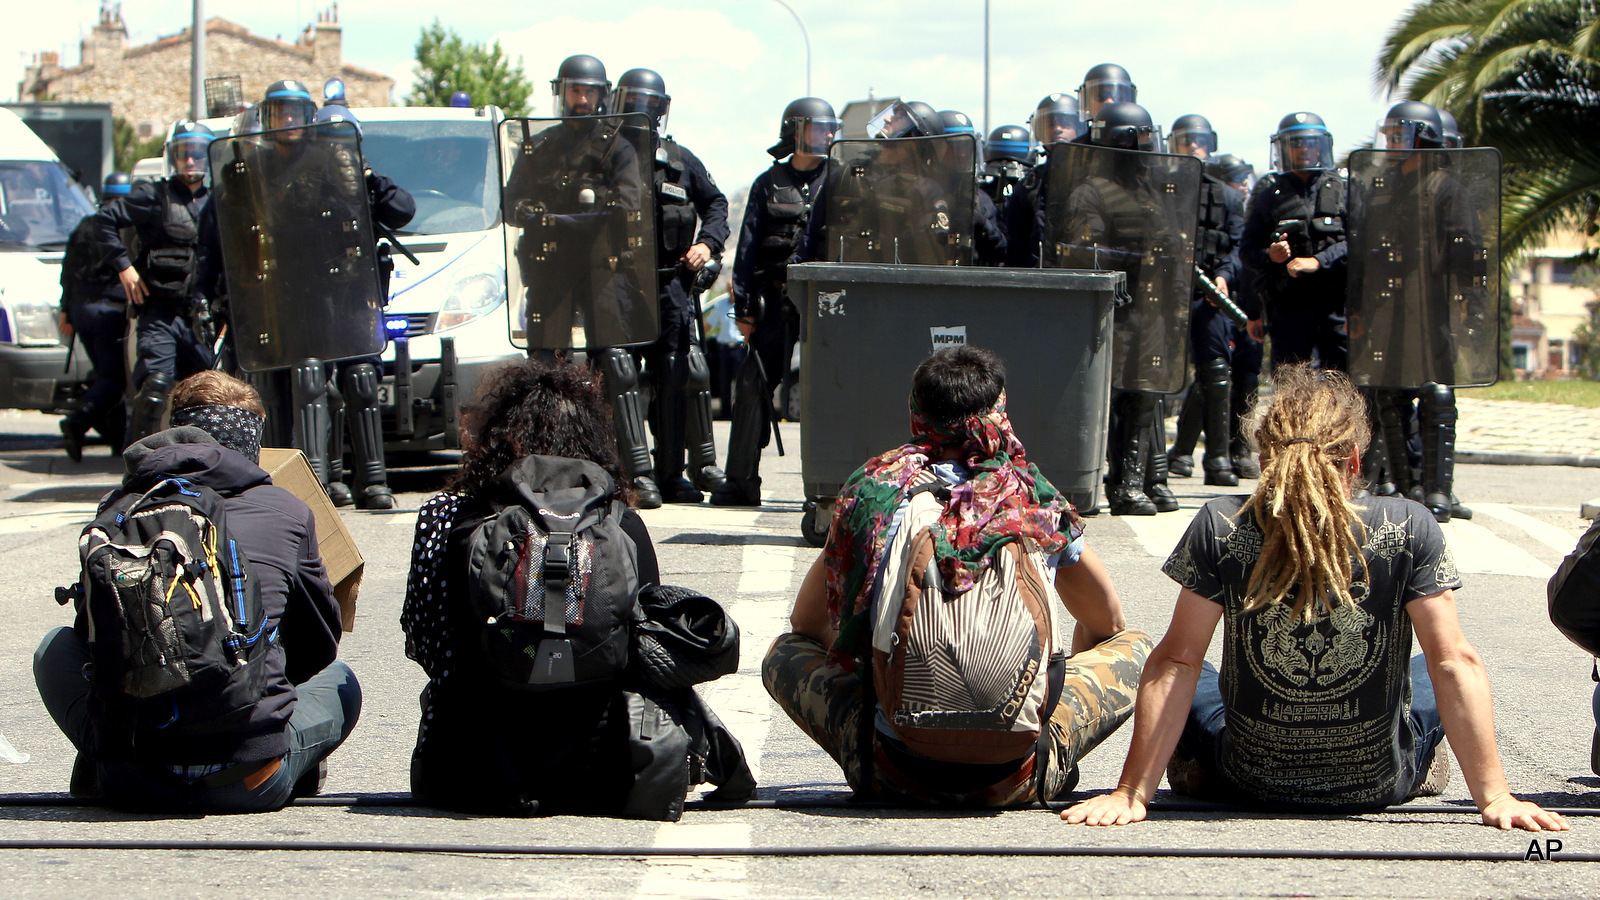 Protestors sit in front of riot police, after a demonstration in Marseille, southern France, Thursday, May 12, 2016. France’s government is facing a major test as lawmakers hold a no-confidence vote, prompted by a deeply divisive labor law allowing longer workdays and easier layoffs. Facing legislative gridlock and daily protests around the country, the Socialist government decided to force the bill through Parliament without a vote.